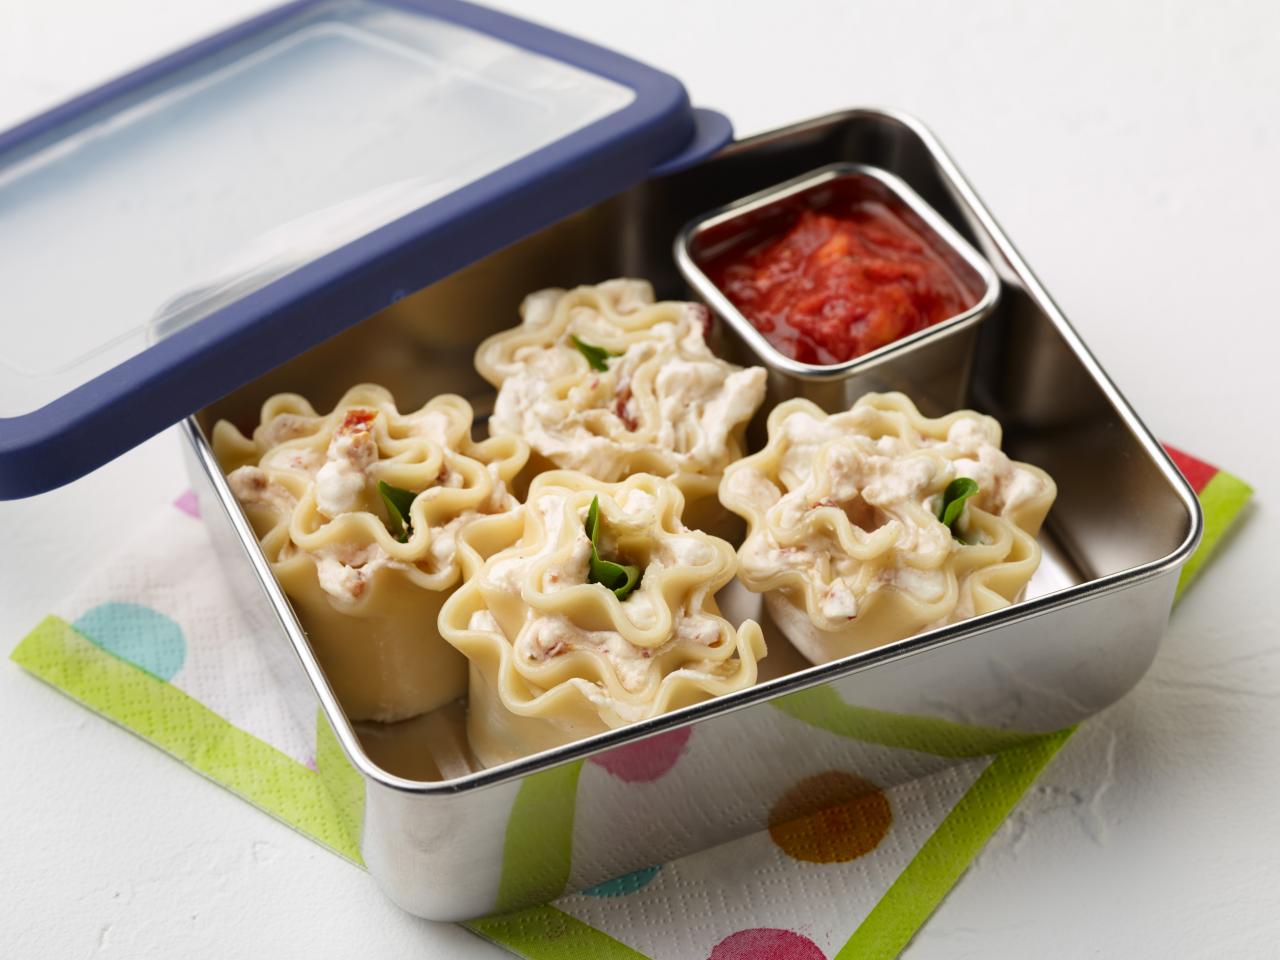 10 amazing hot school lunch ideas for kids - Healthy Food Guide